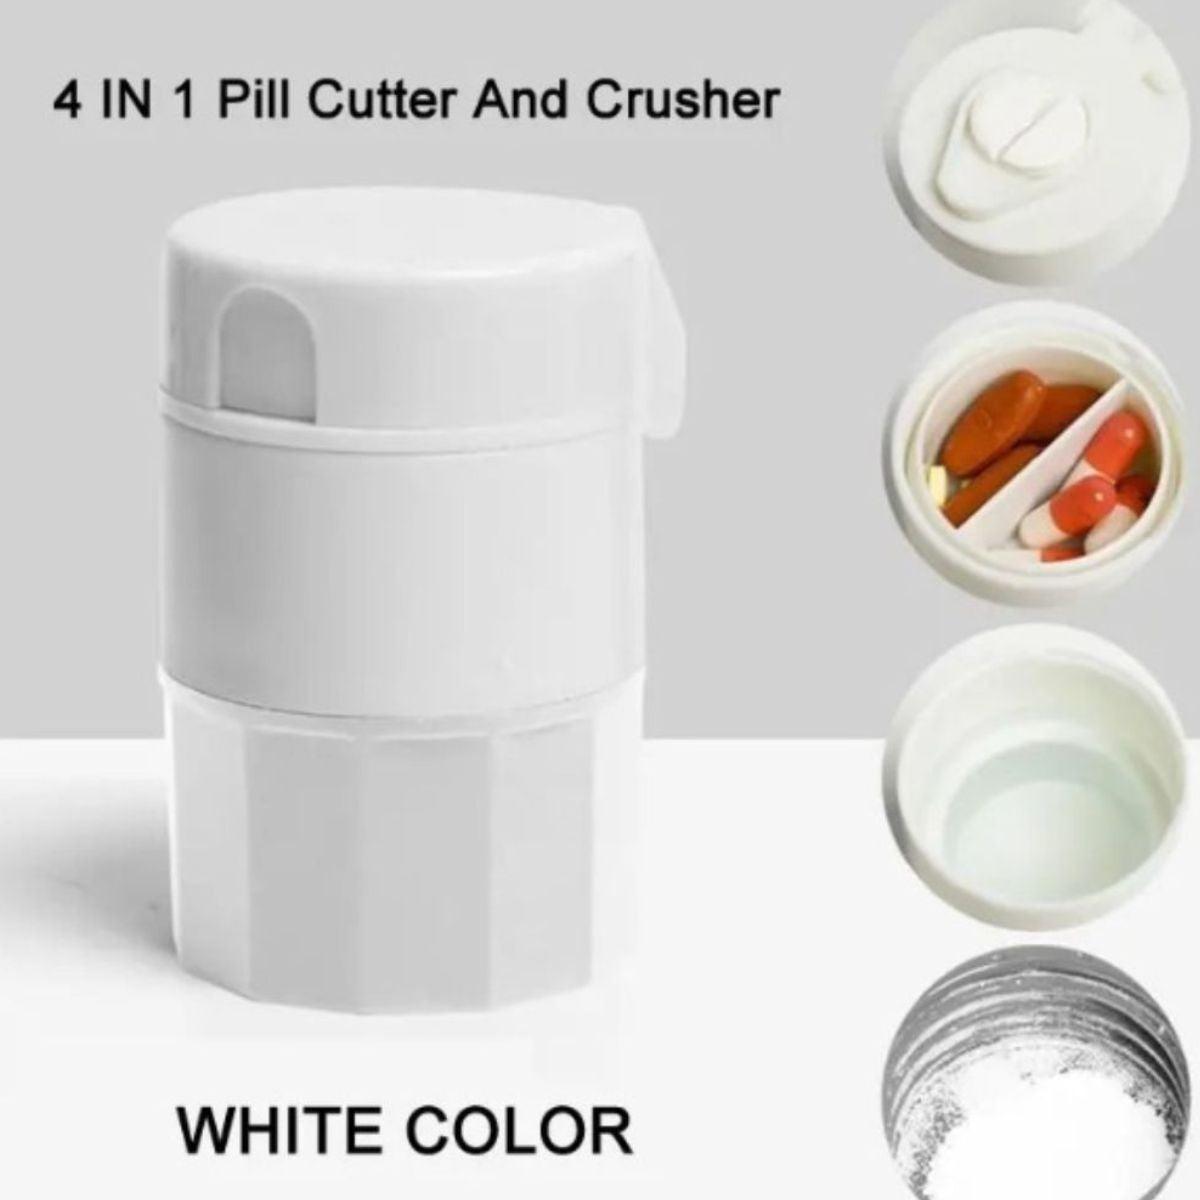 Tablet Cutter & Crusher - tcistarhealthproducts